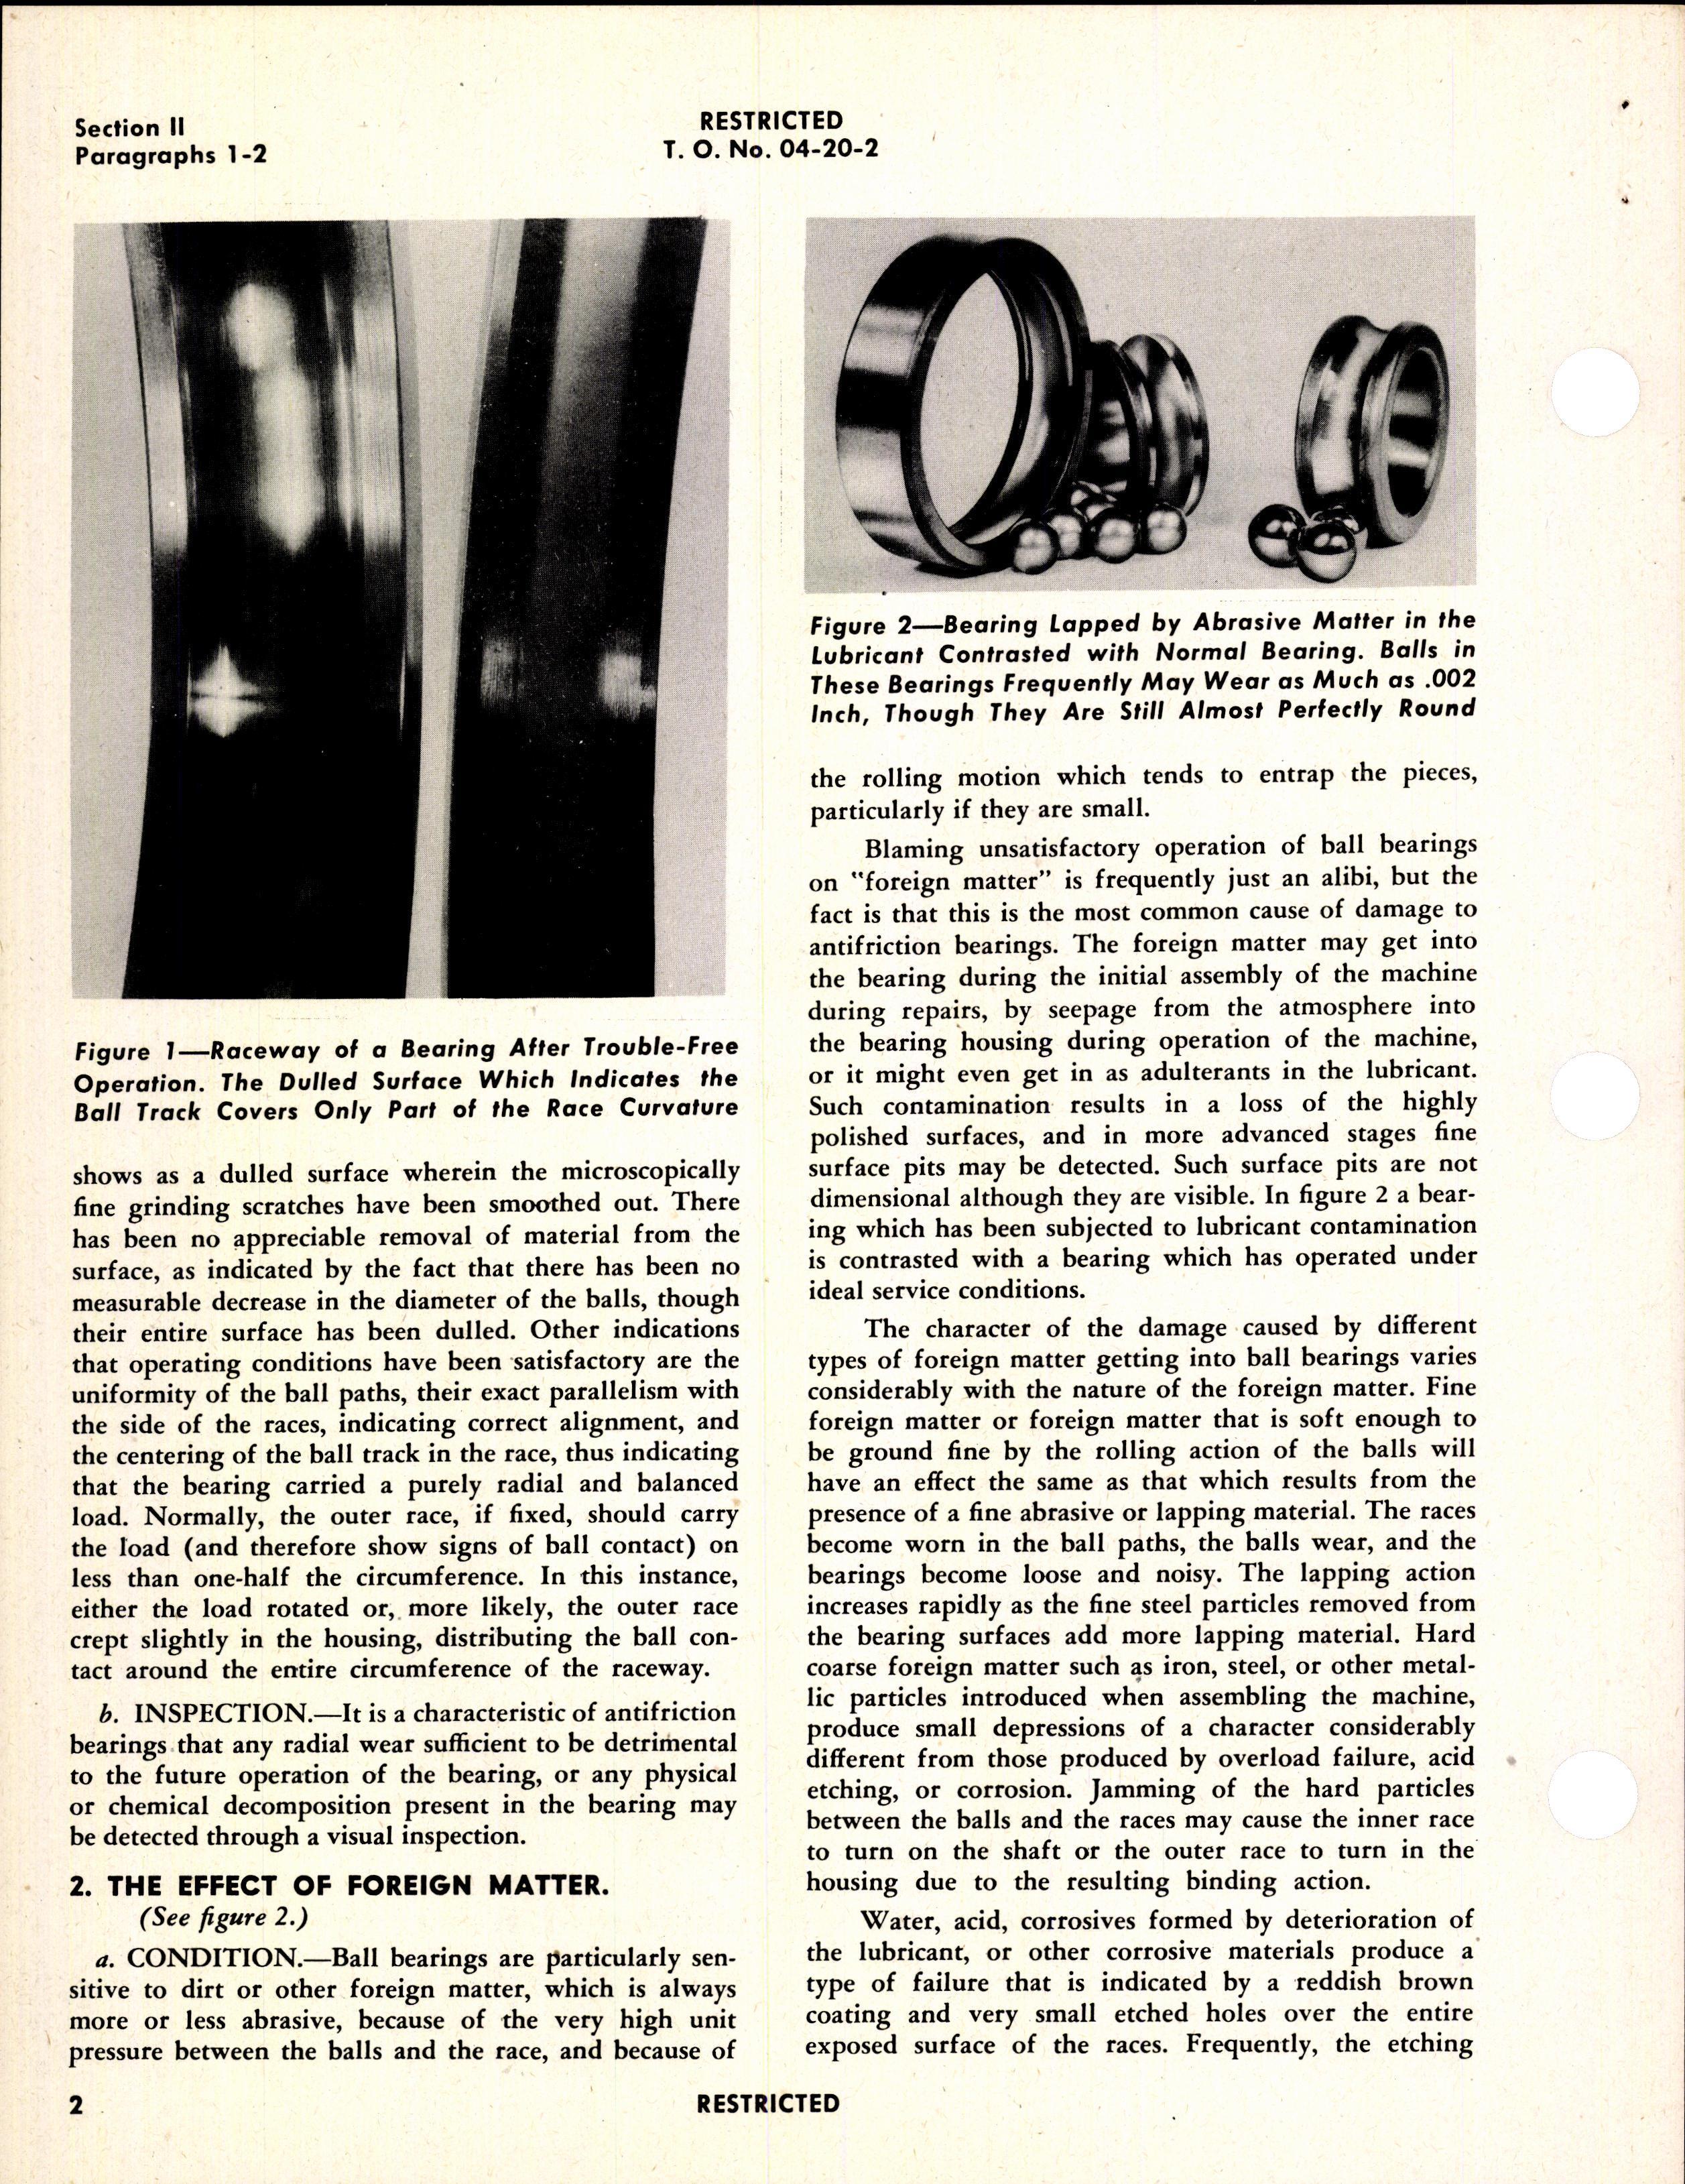 Sample page 6 from AirCorps Library document: Inspection Procedures for Antifriction Bearings